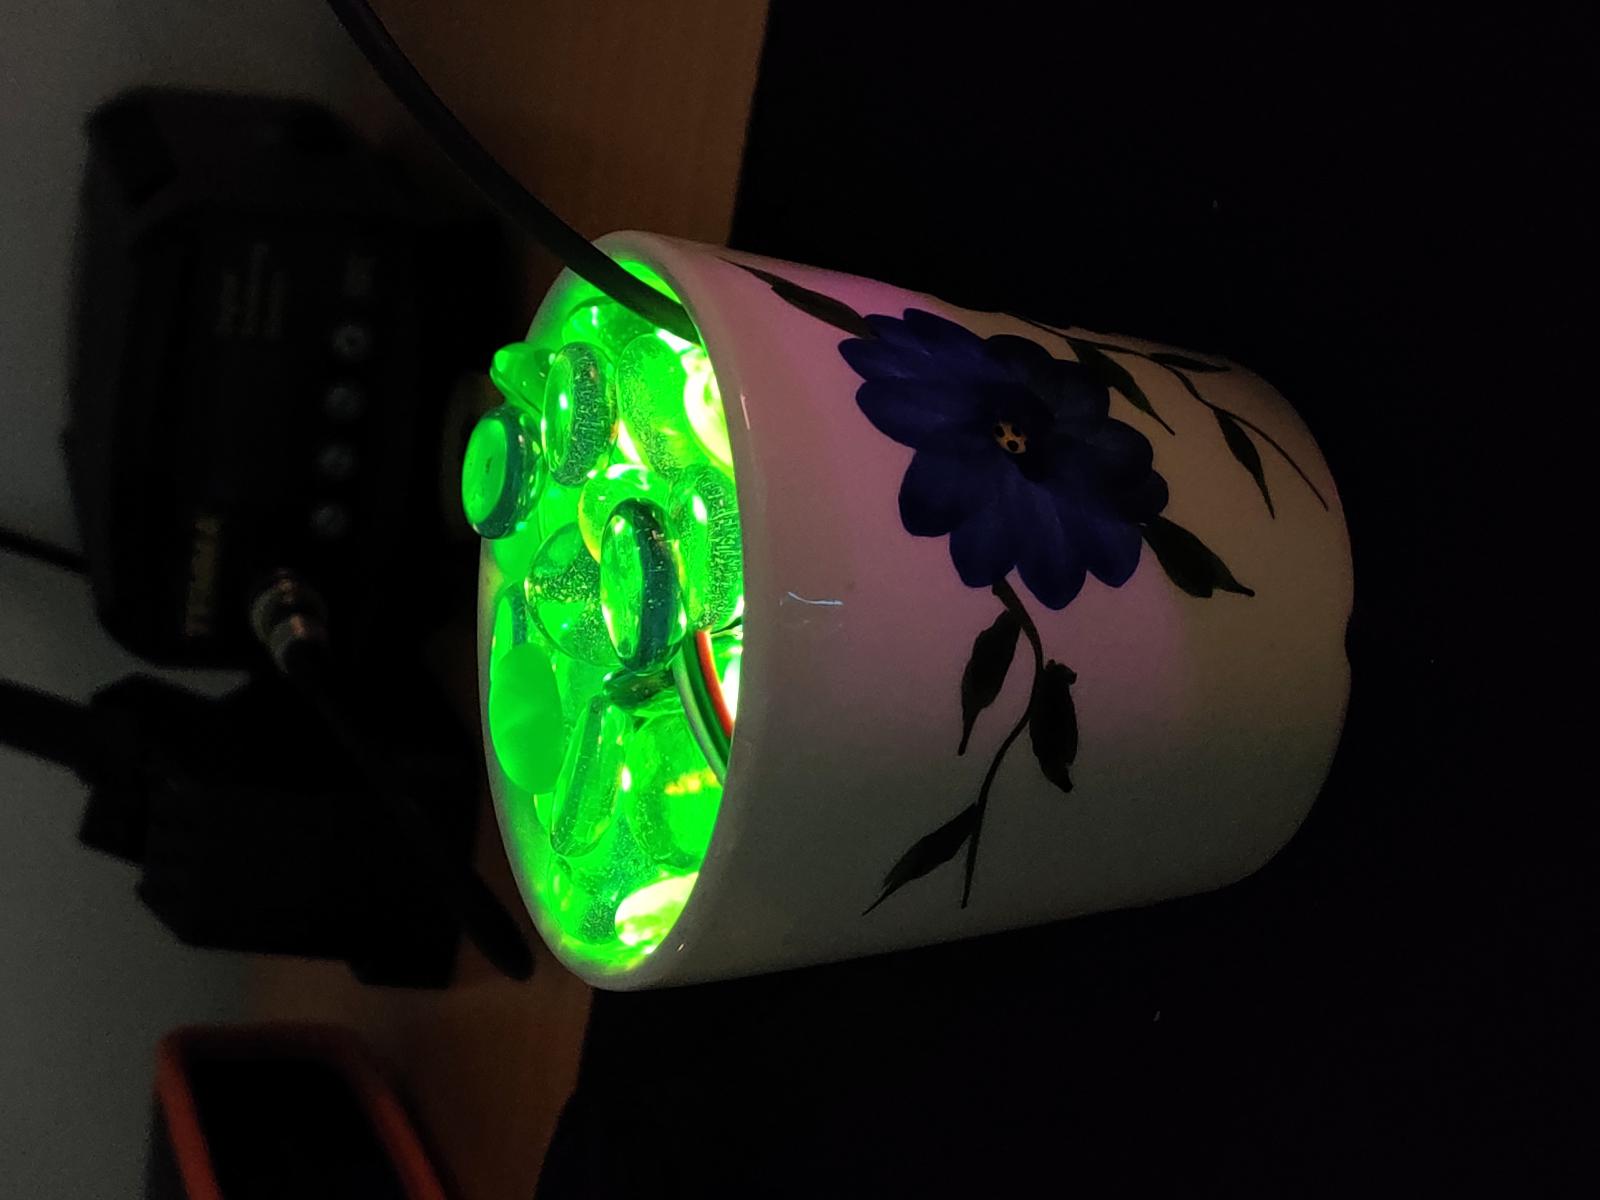 Today I made an NTP synchronized smart-lamp